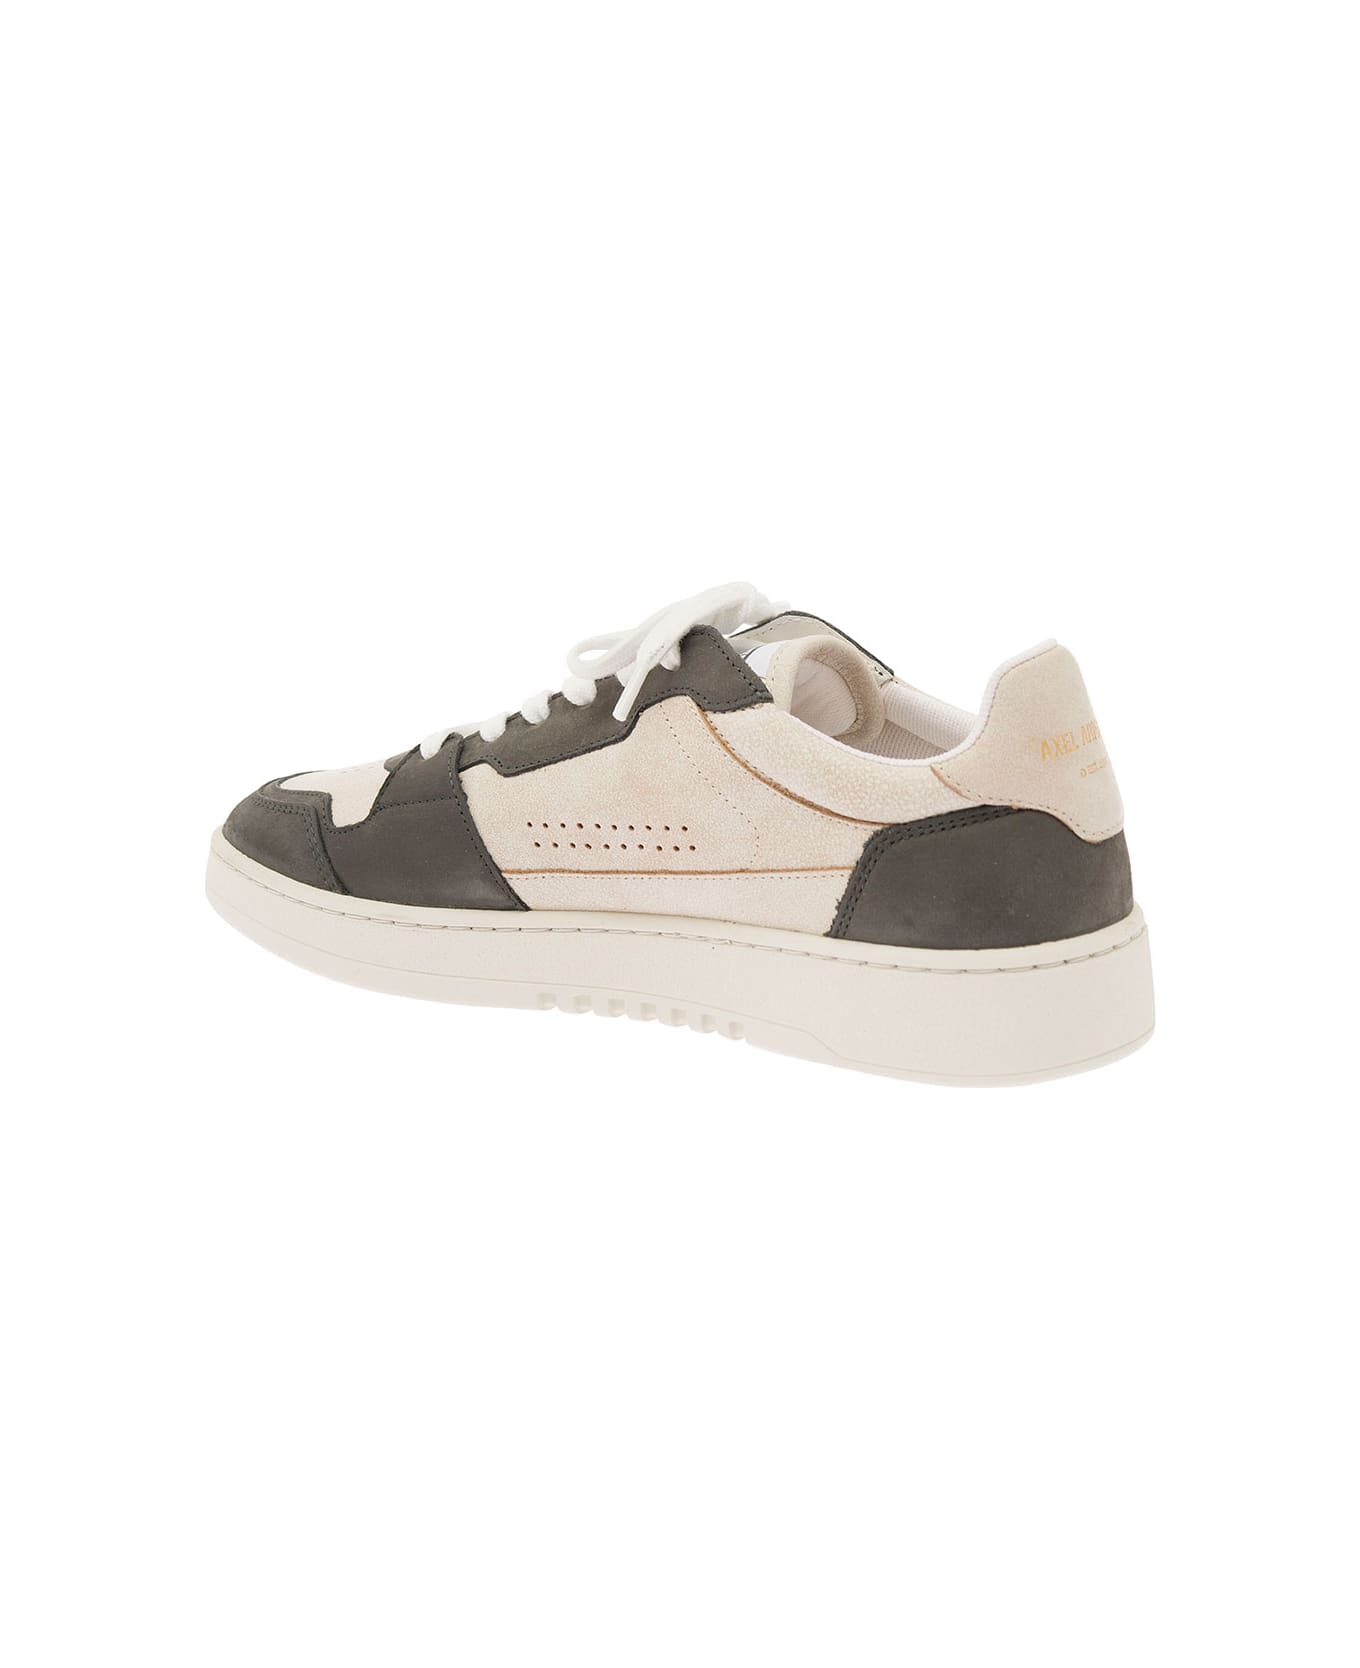 Axel Arigato 'dice Lo' Green And White Two-tone Sneakers In Calf Leather Man - Beige スニーカー